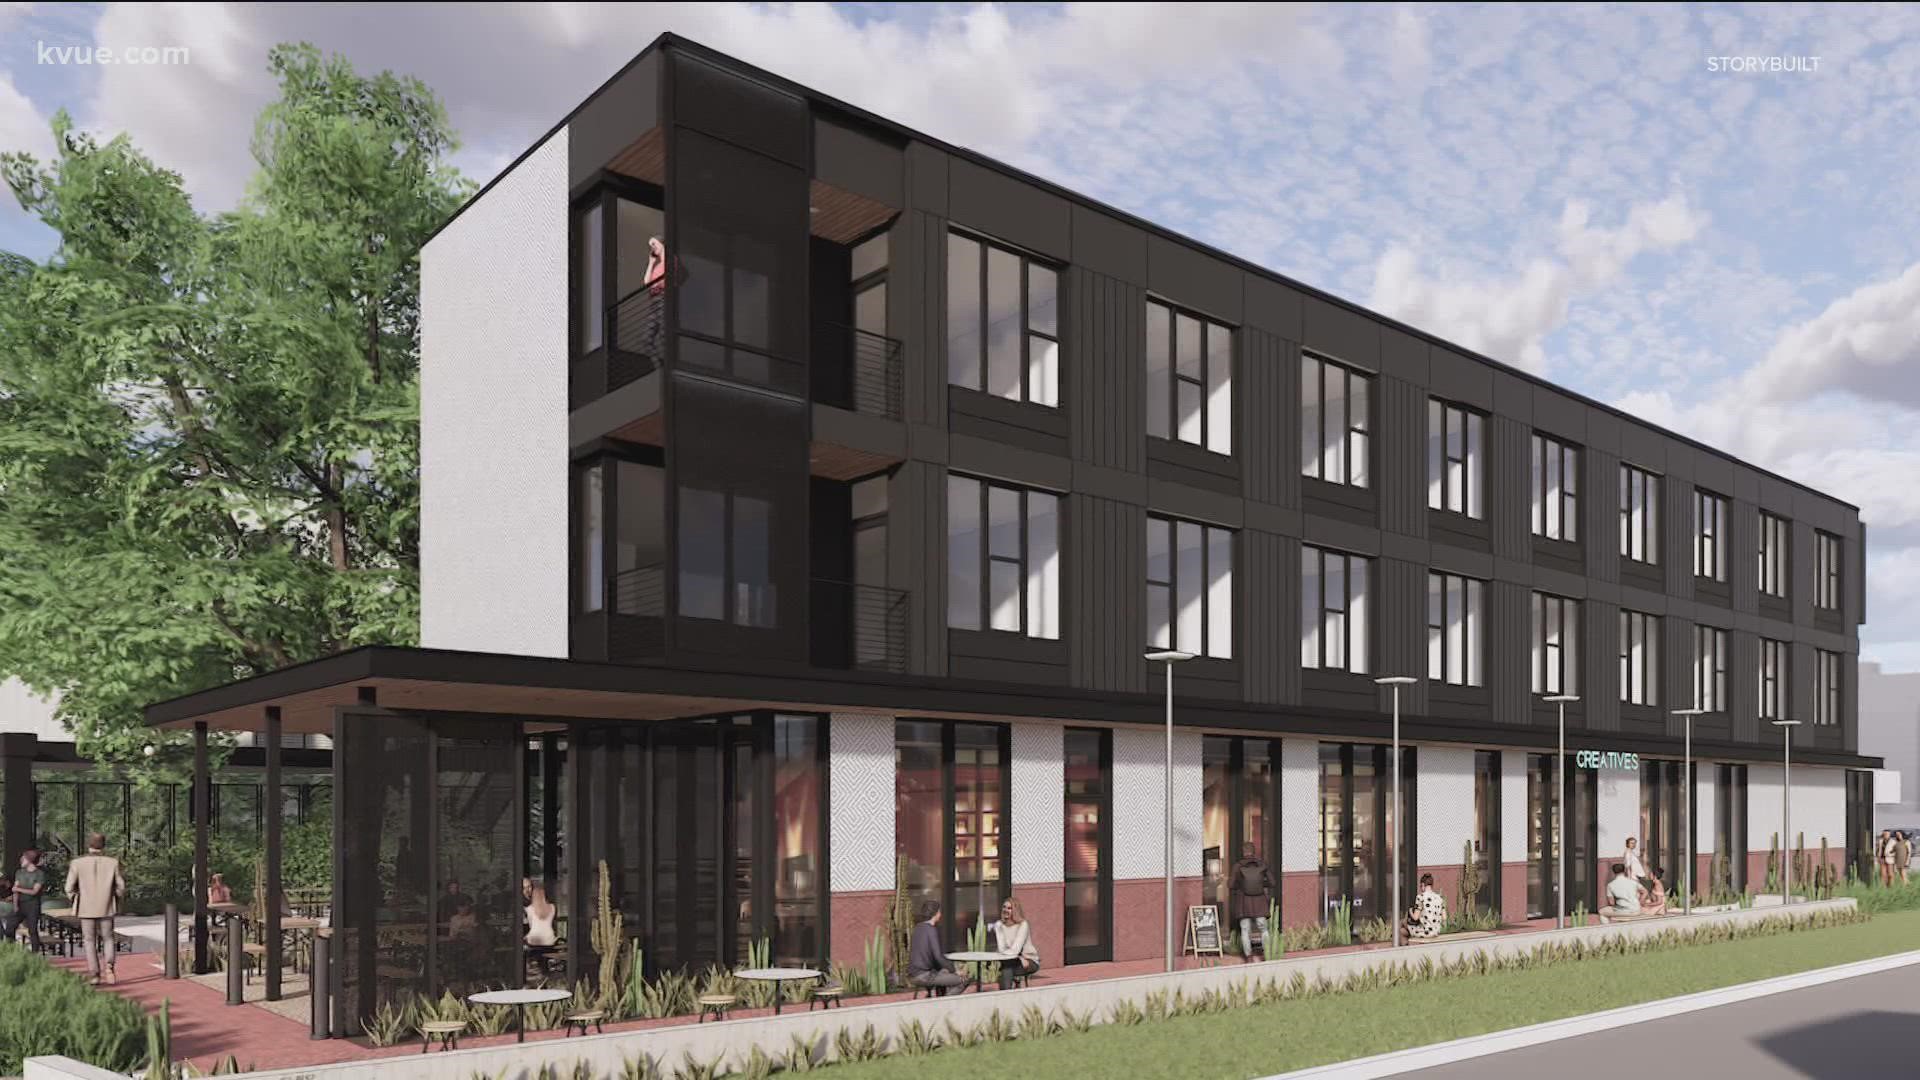 The development, codenamed Bruno, will feature units ranging in size from 308 to 703 square feet. Some 3,000 square feet on the ground floor will feature retail.